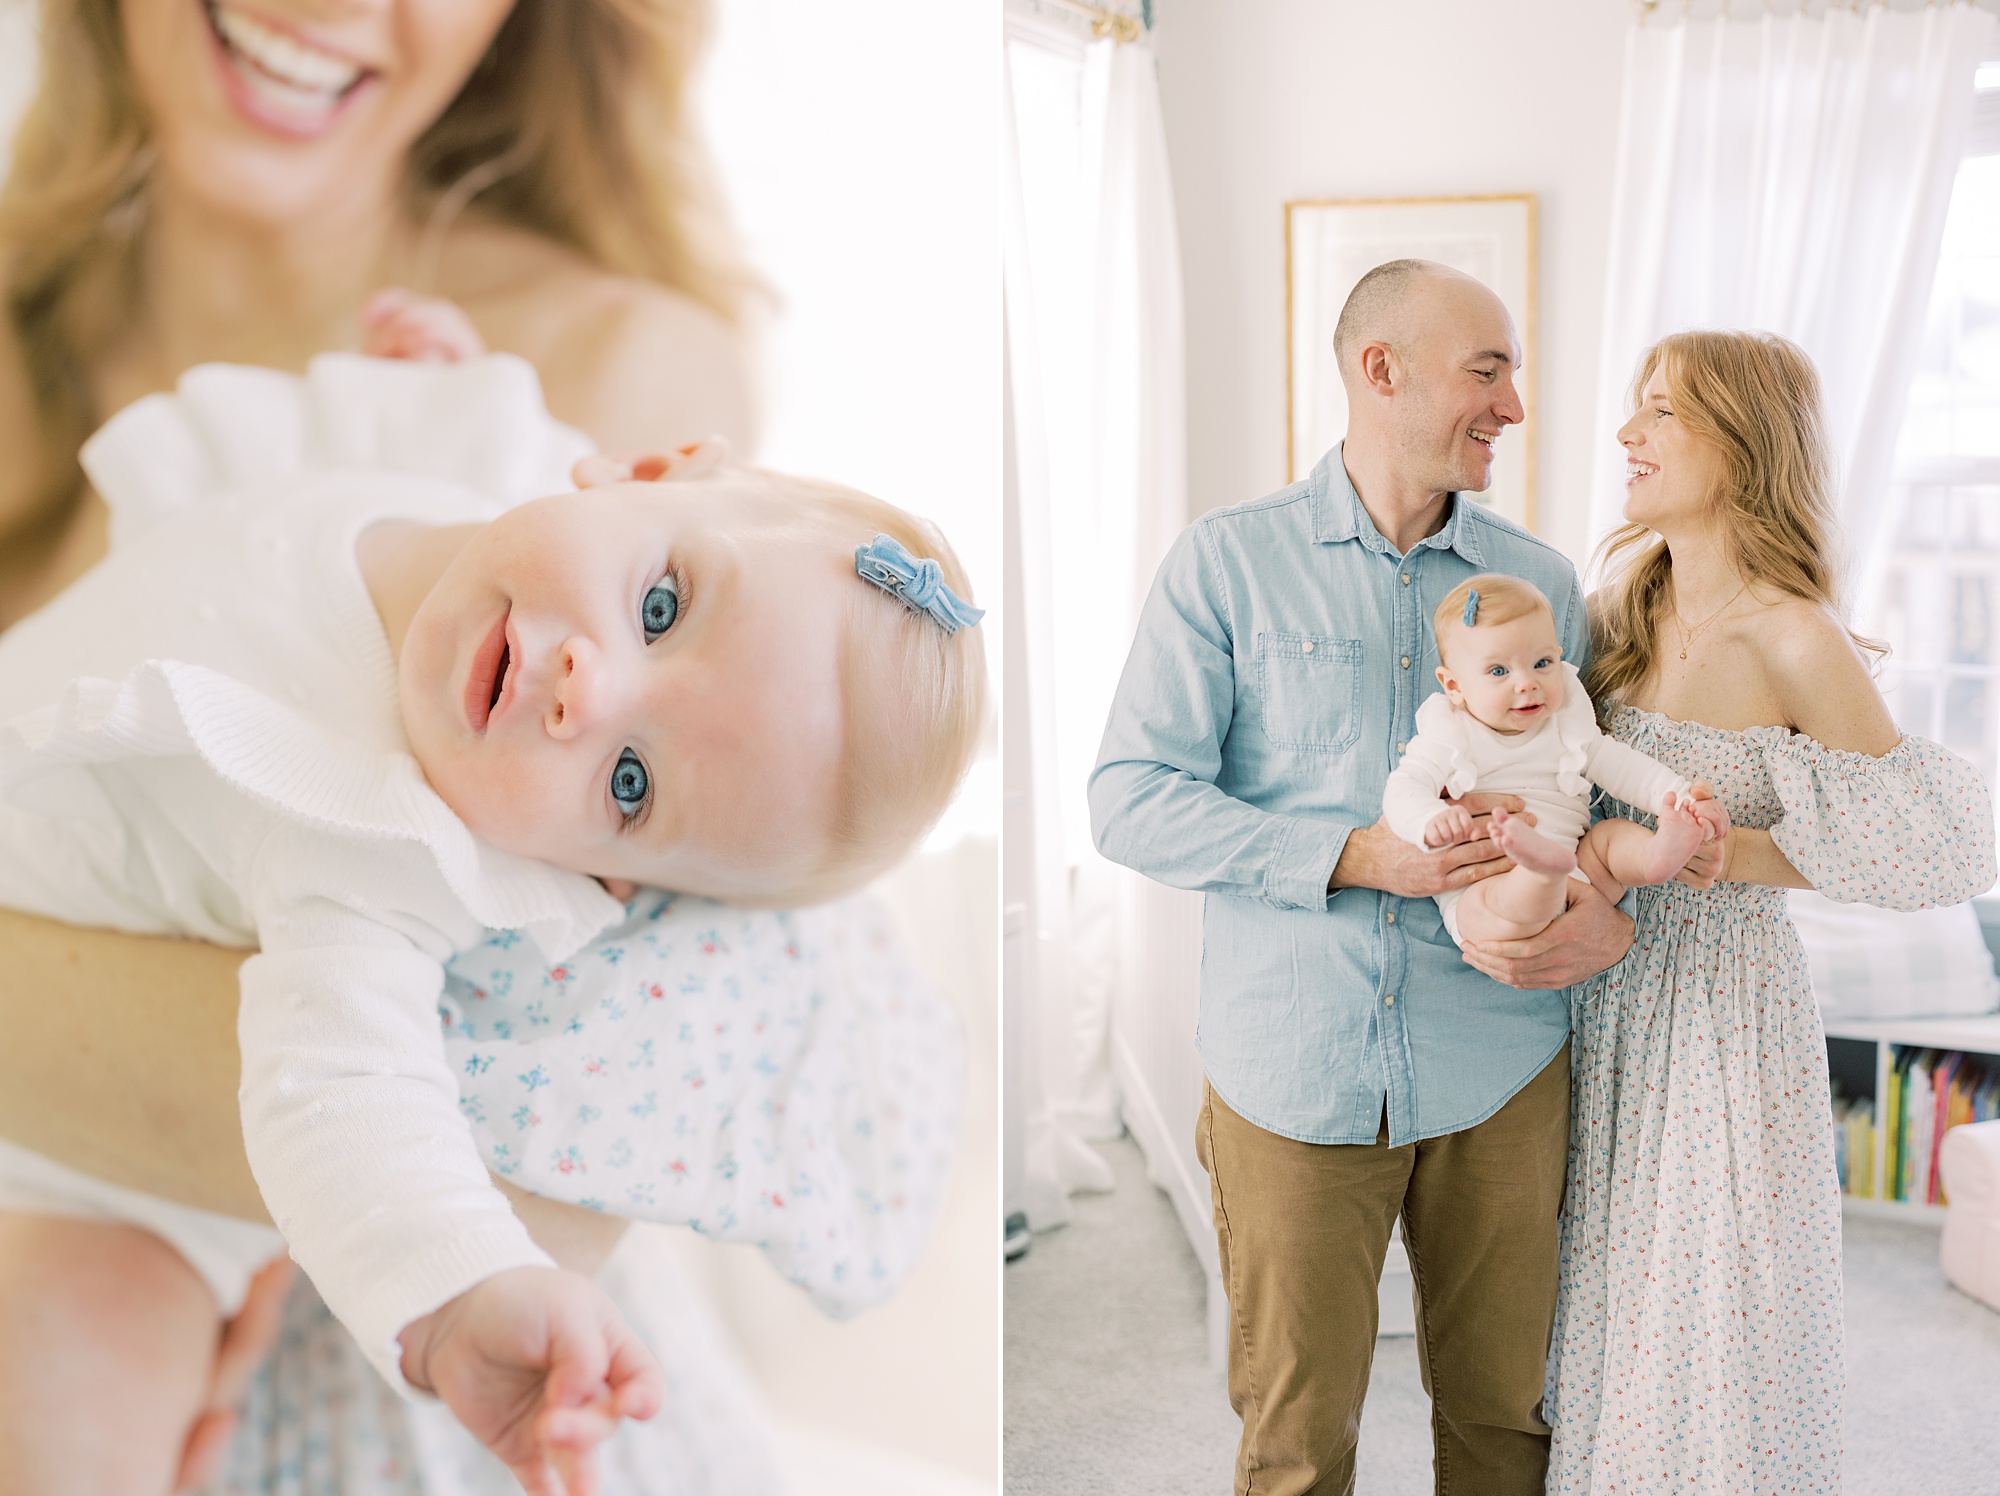 baby leans out of dad's arm during lifestyle milestone portraits in nursery 